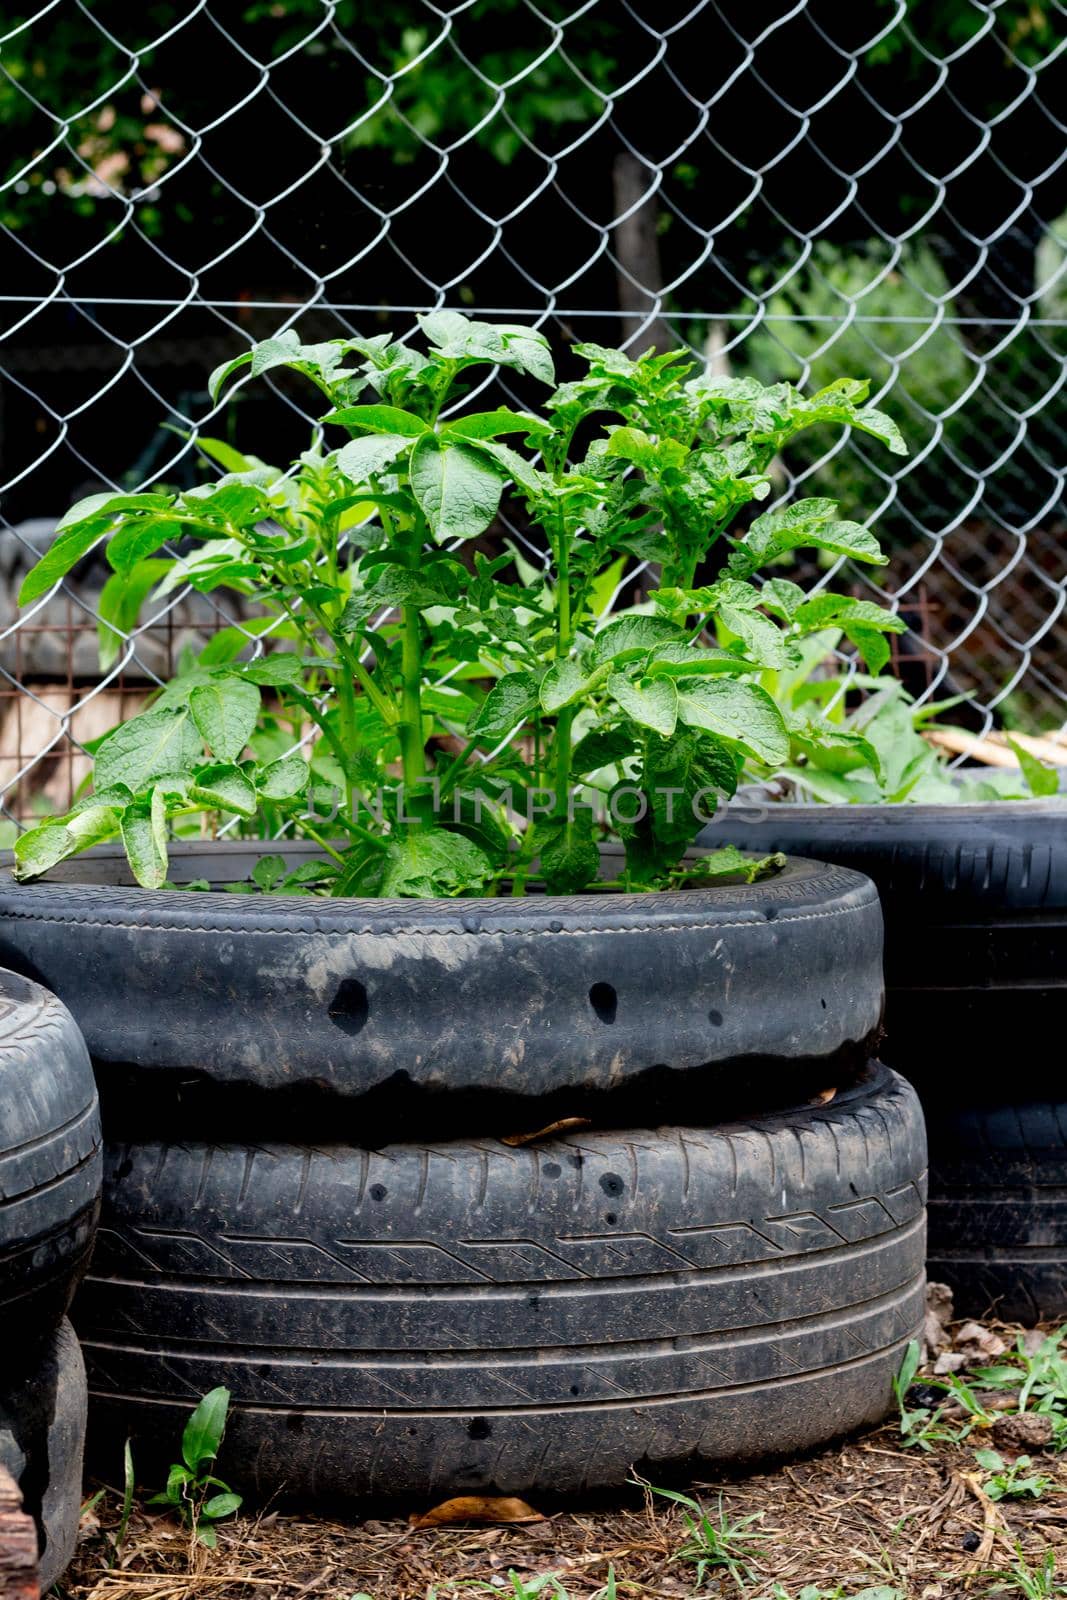 growing potatoes vertically recycling car tires by GabrielaBertolini